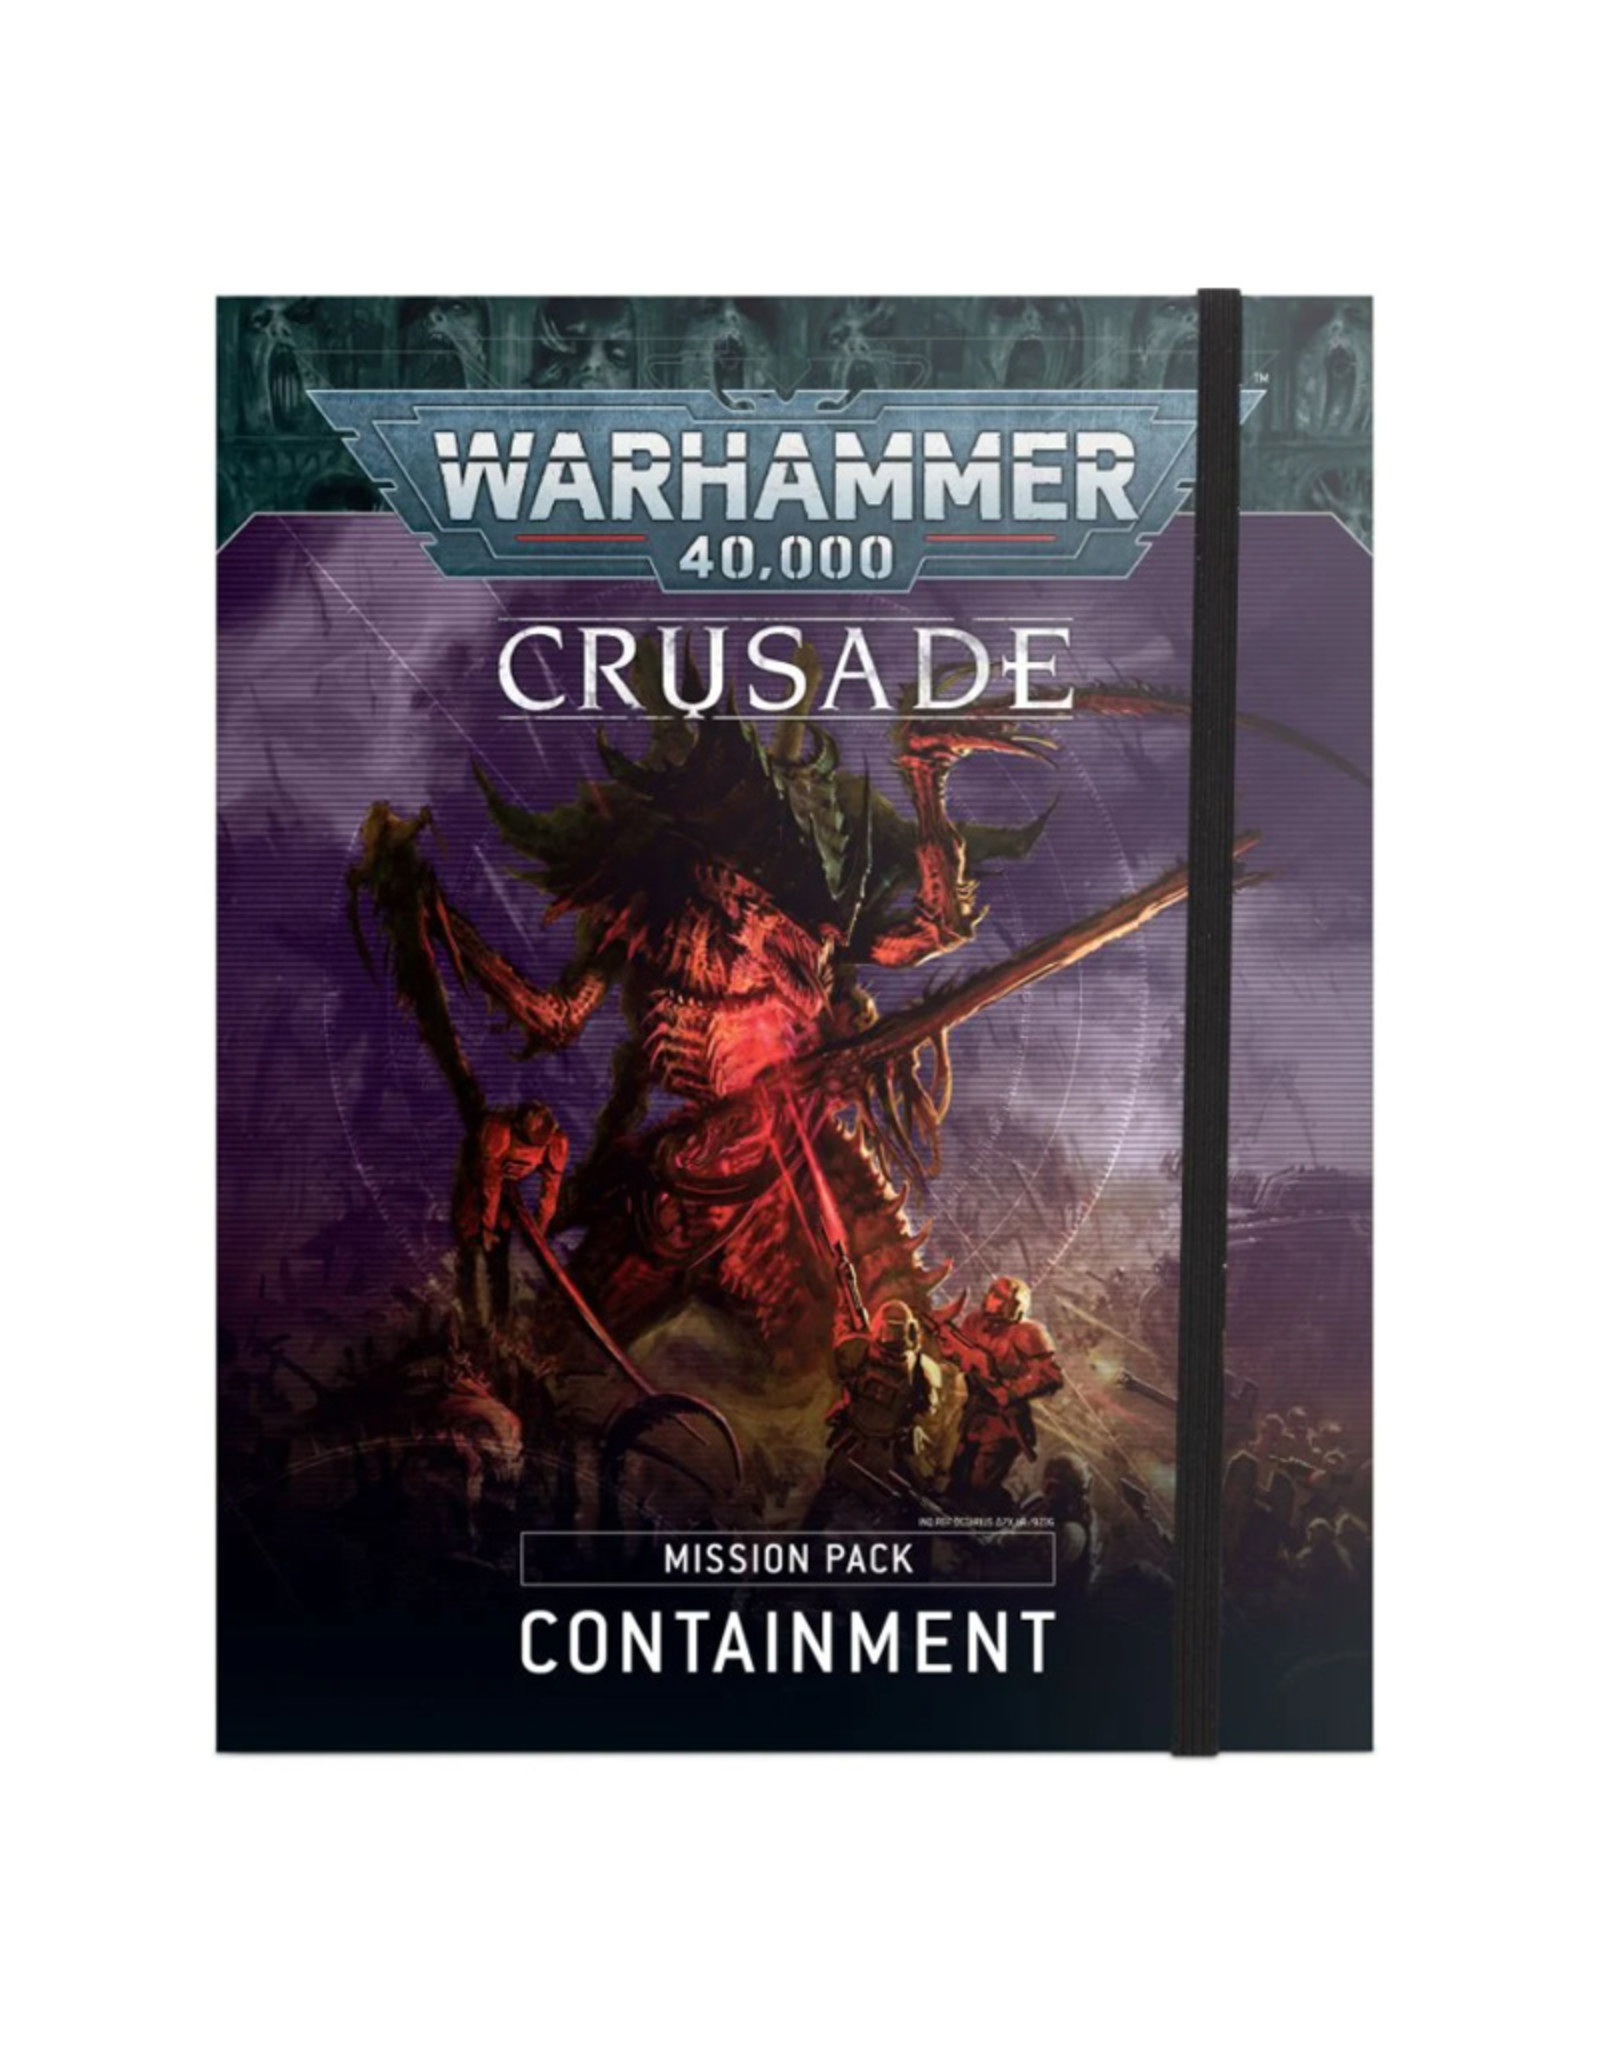 Games Workshop Warhammer 40,000 Crusade Mission Pack Containment